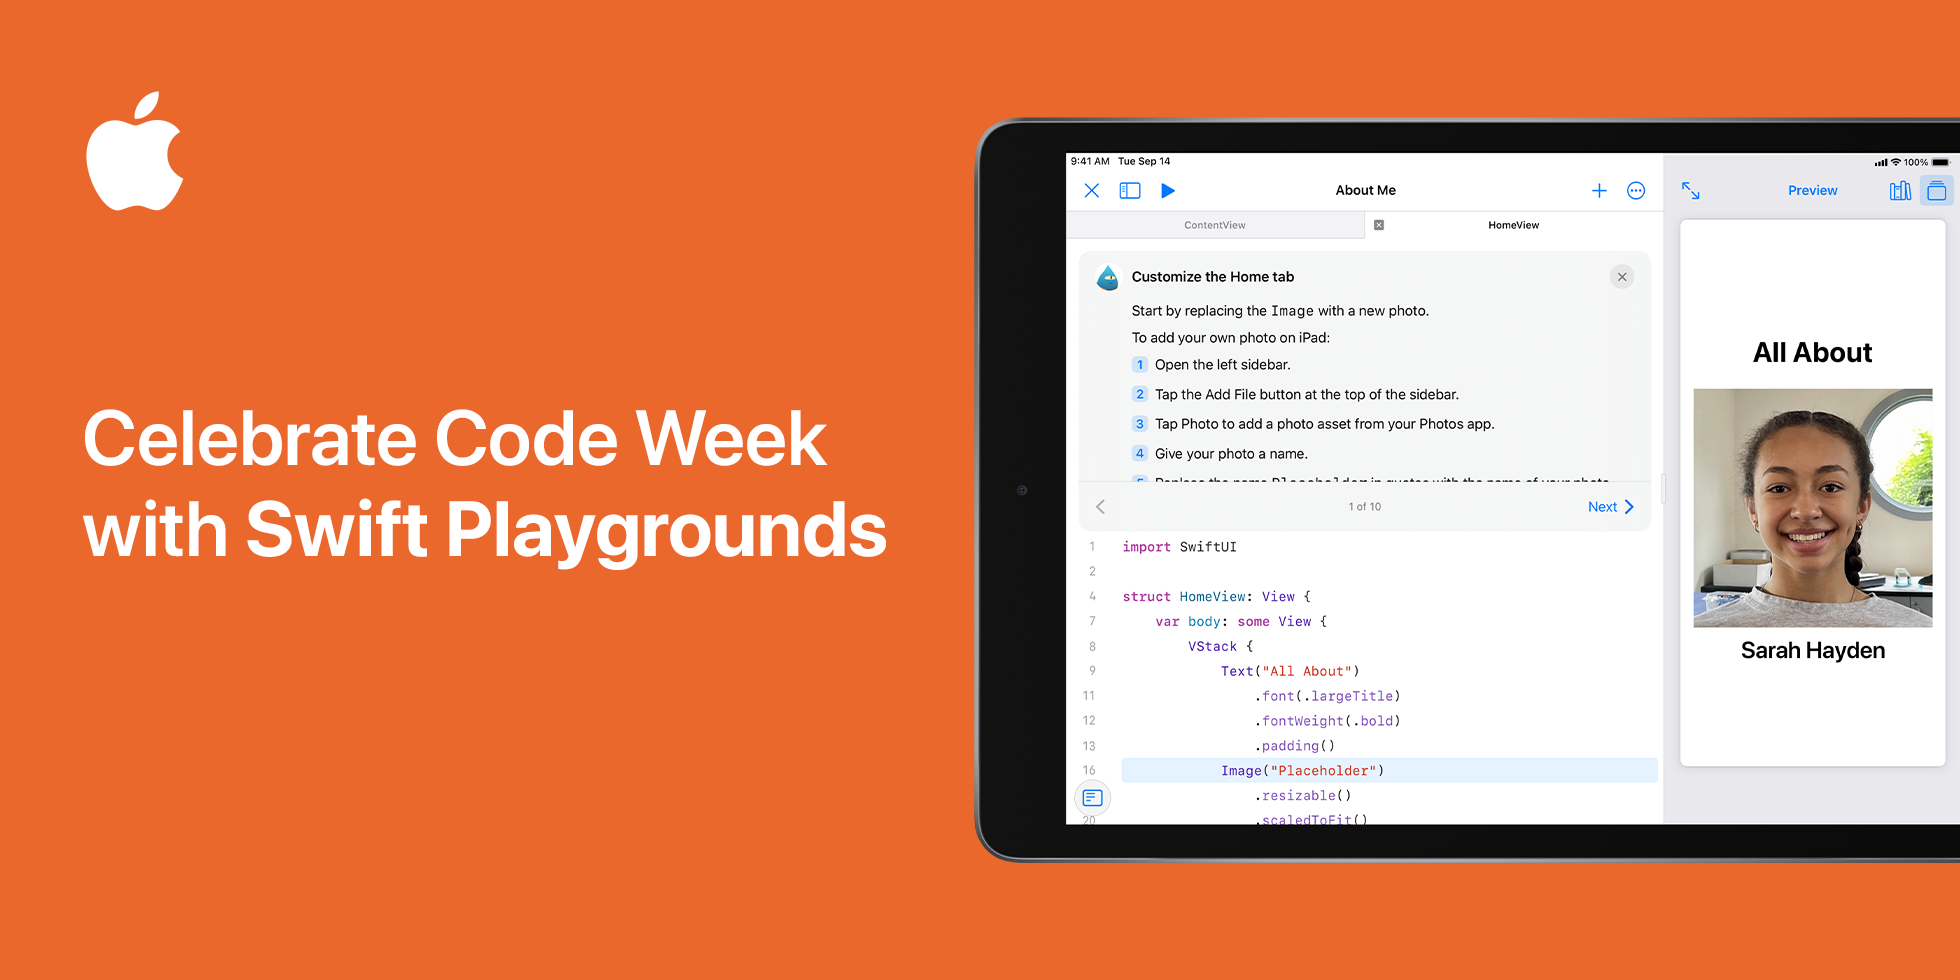 Swift Playgrounds image on iPad with title 'Celebrate Code Week with Swift Playgrounds.'